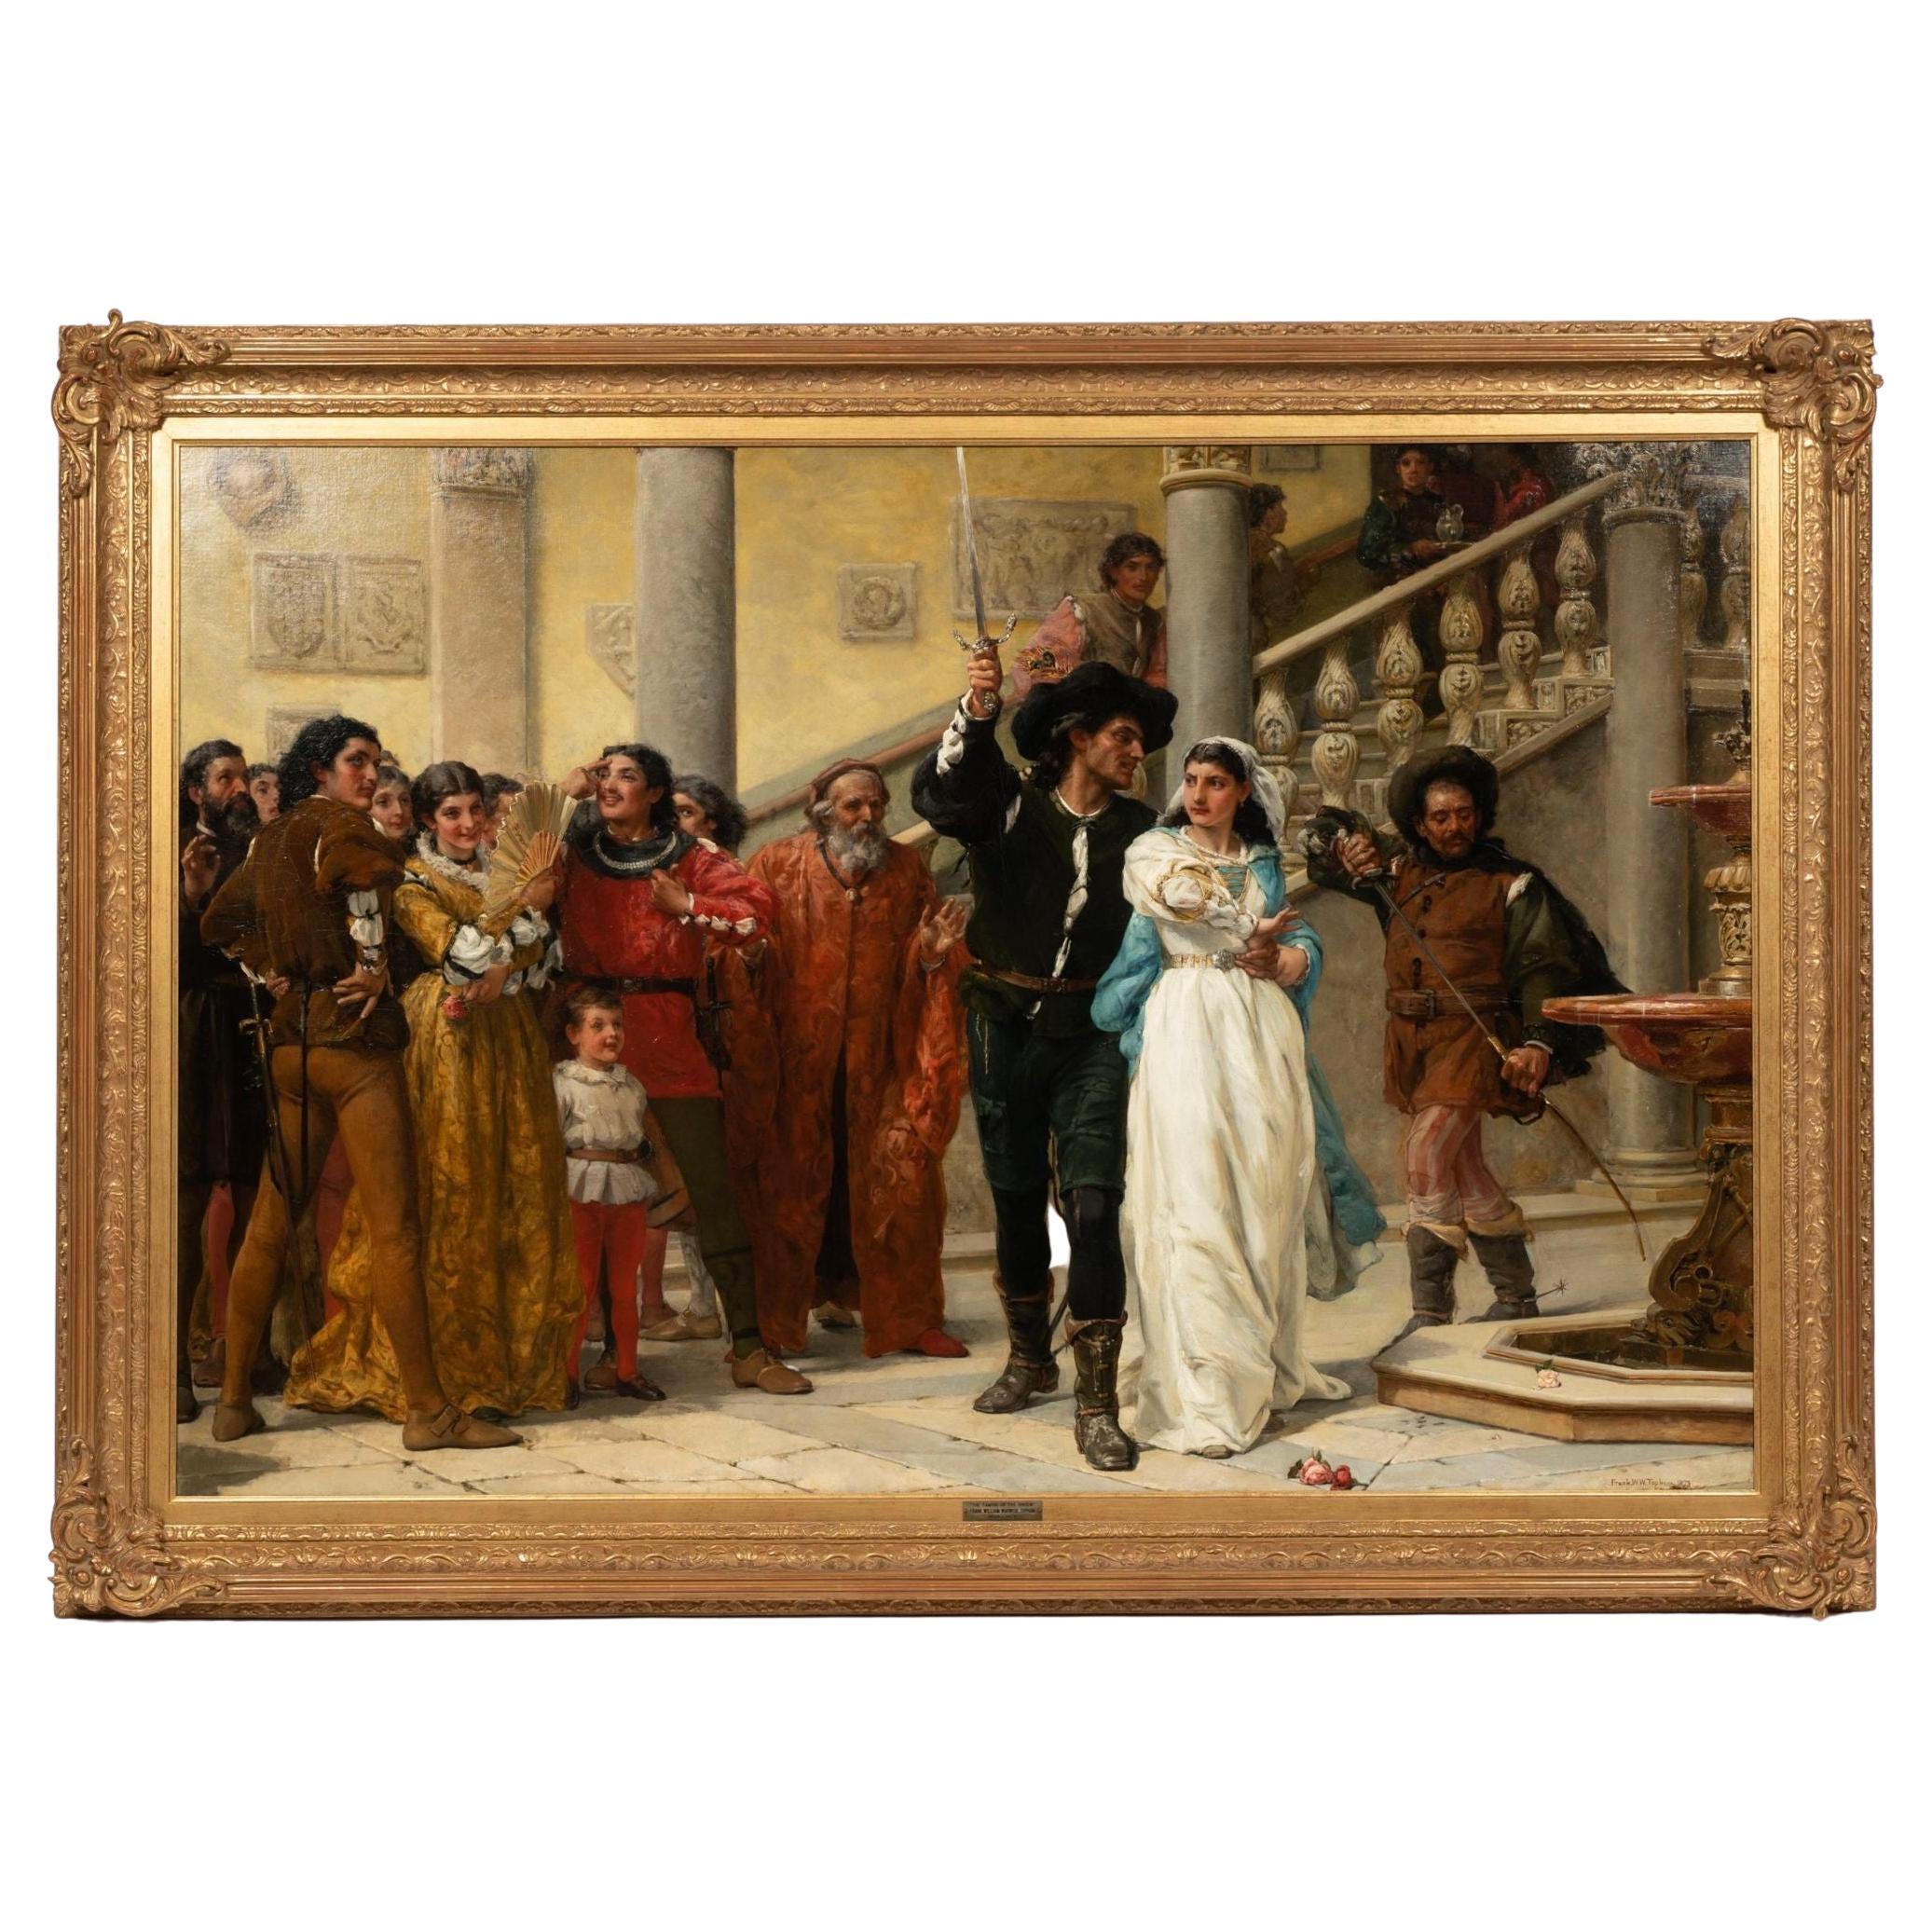 "The Taming of the Shrew" by Frank William Warwick Topham, Oil on Canvas (1879)